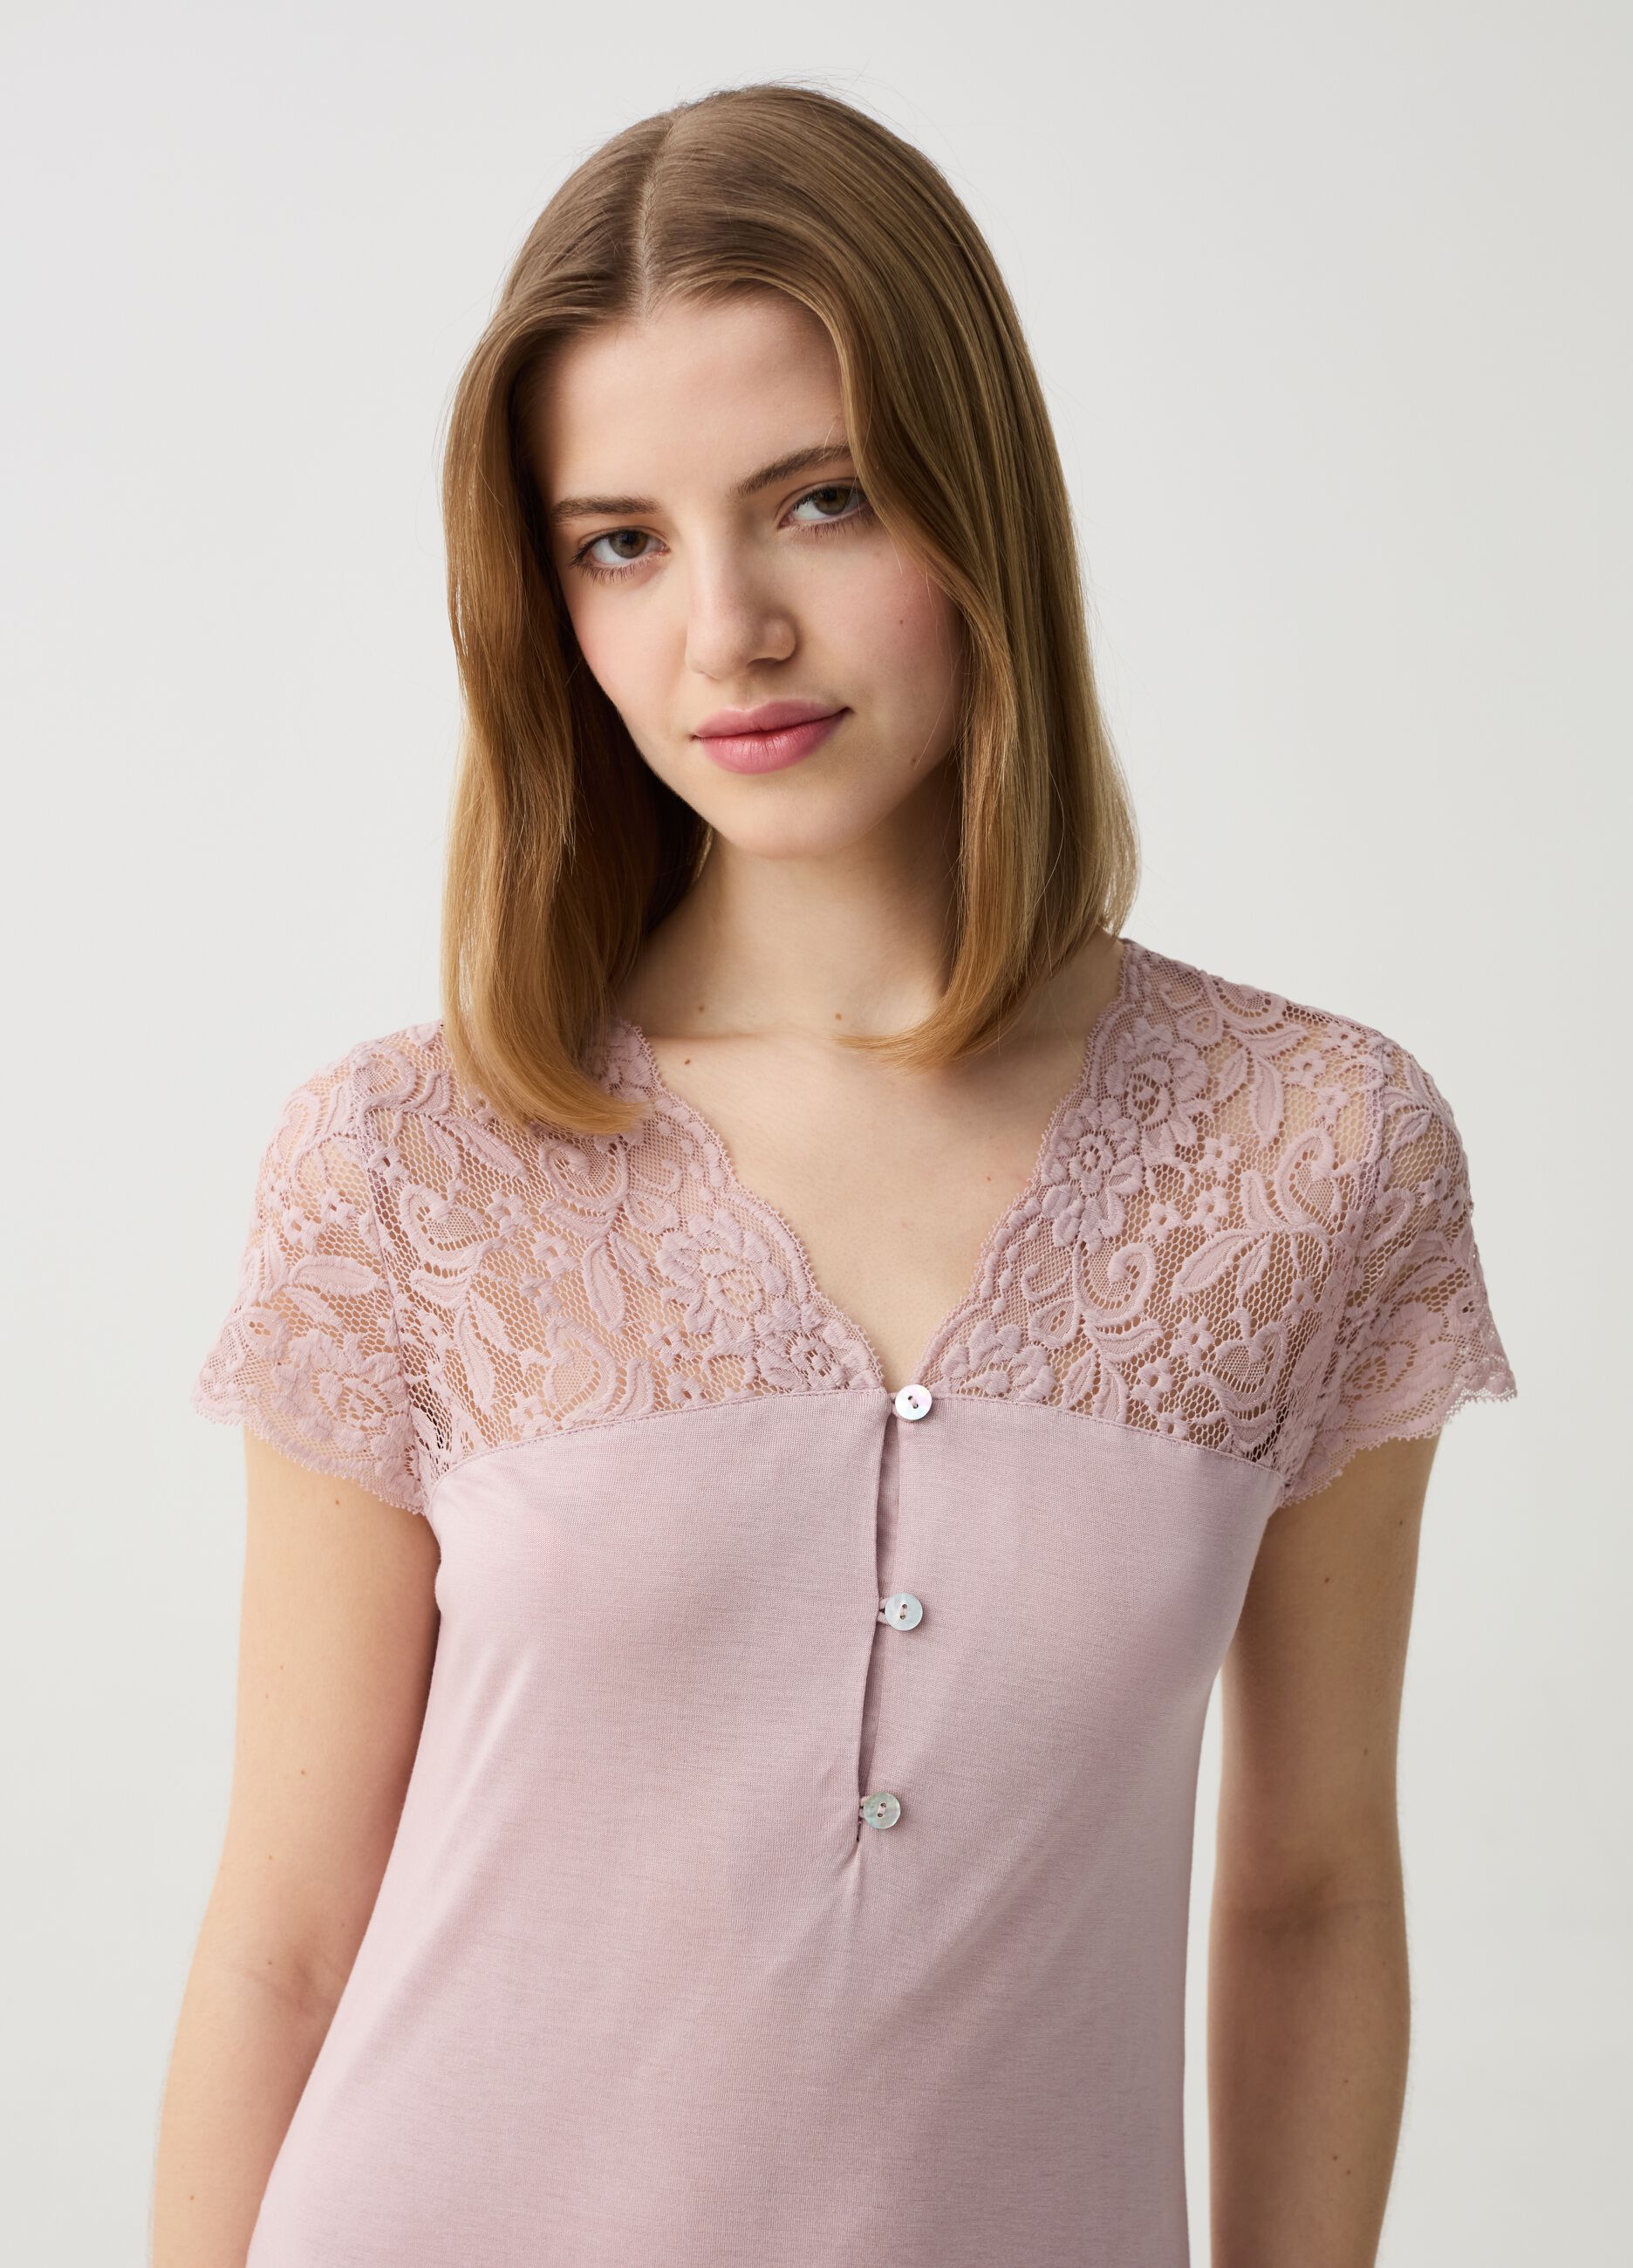 Nightdress with floral lace